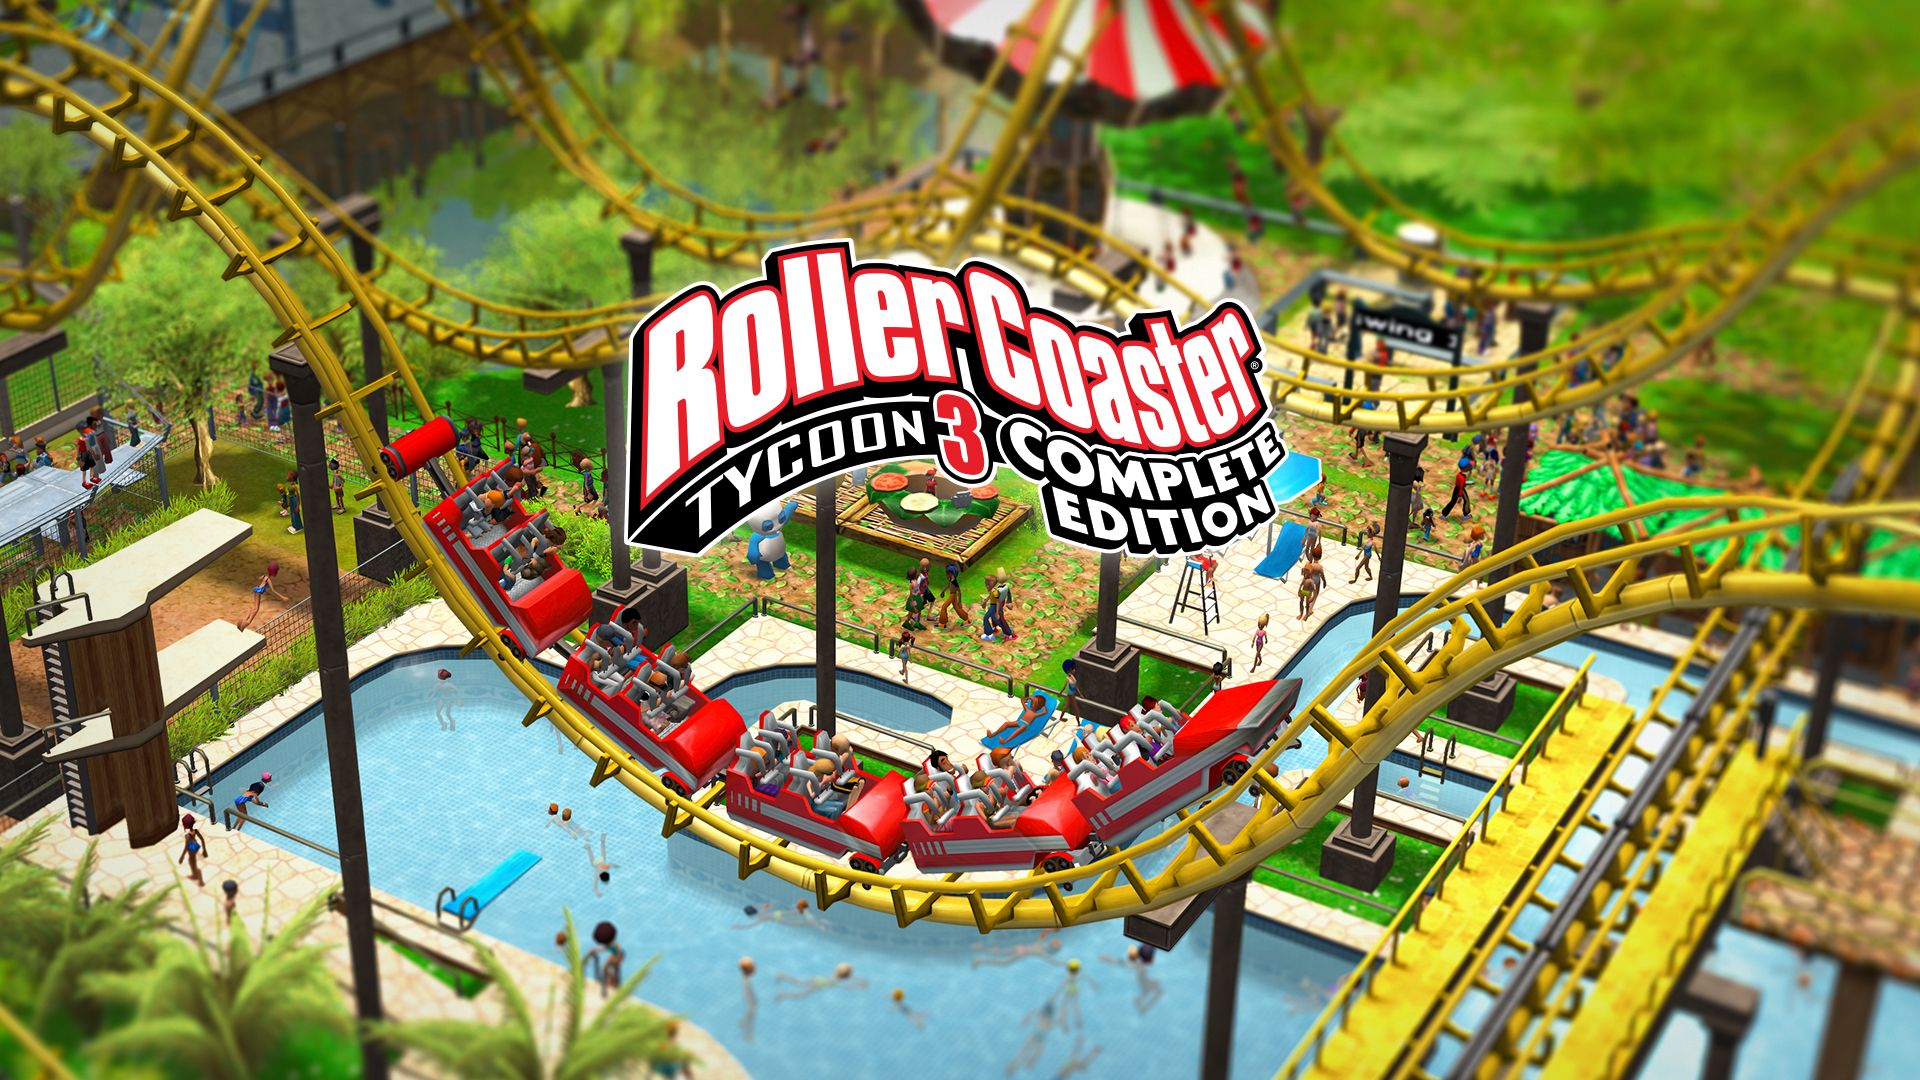 RollerCoaster Tycoon 3 Complete Edition for Nintendo Switch Game Details